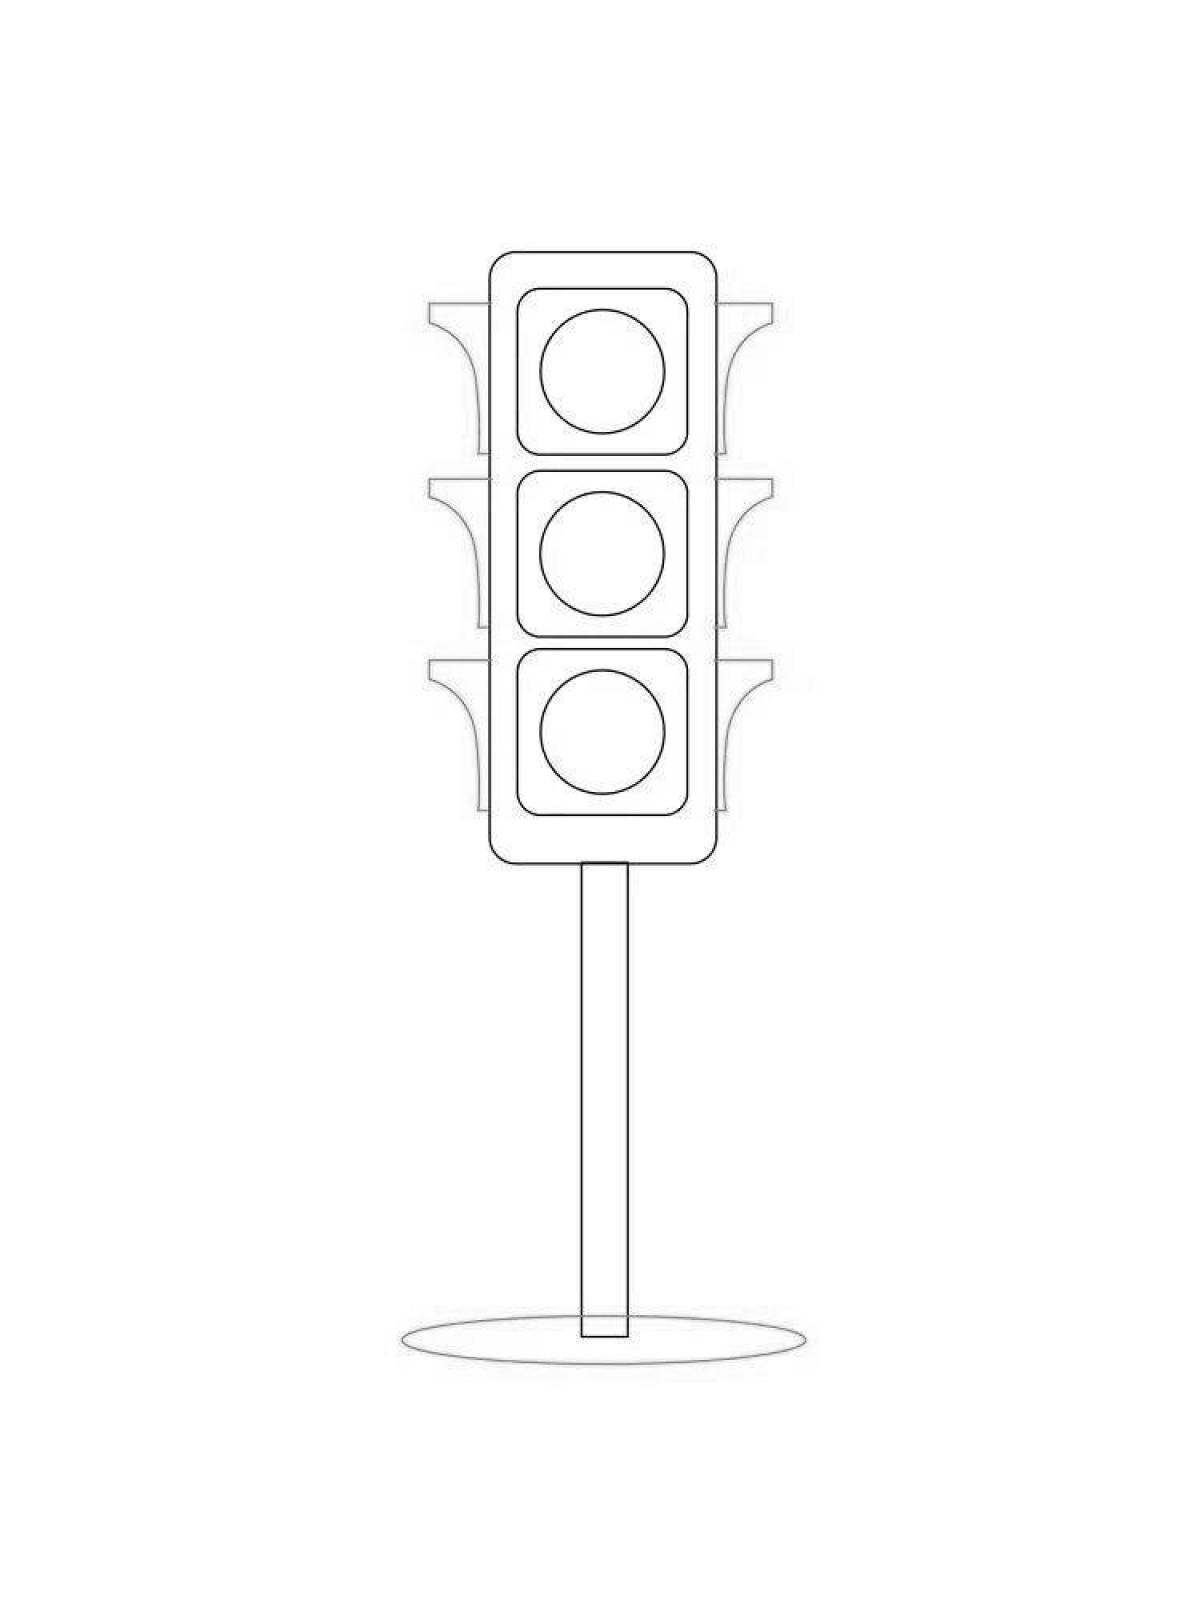 Attractive traffic light picture for kids